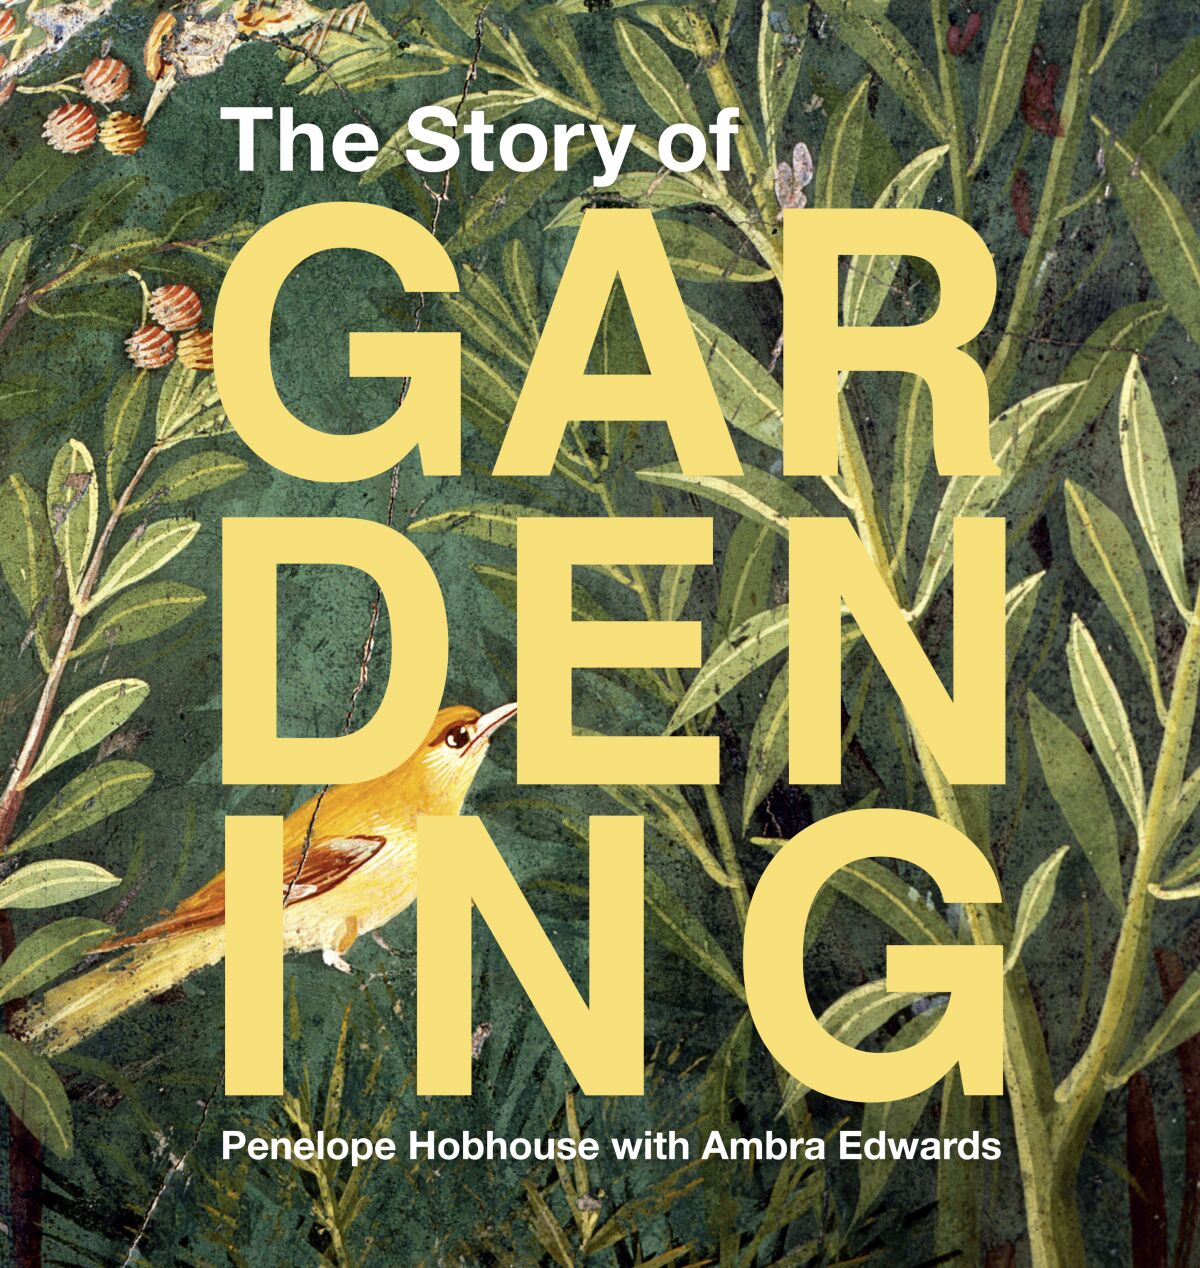 This cover image released by Princeton Architectural Press shows "The Story of Gardening" by Penelope Hobhouse with Ambra Edwards. (Princeton Architectural Press via AP)